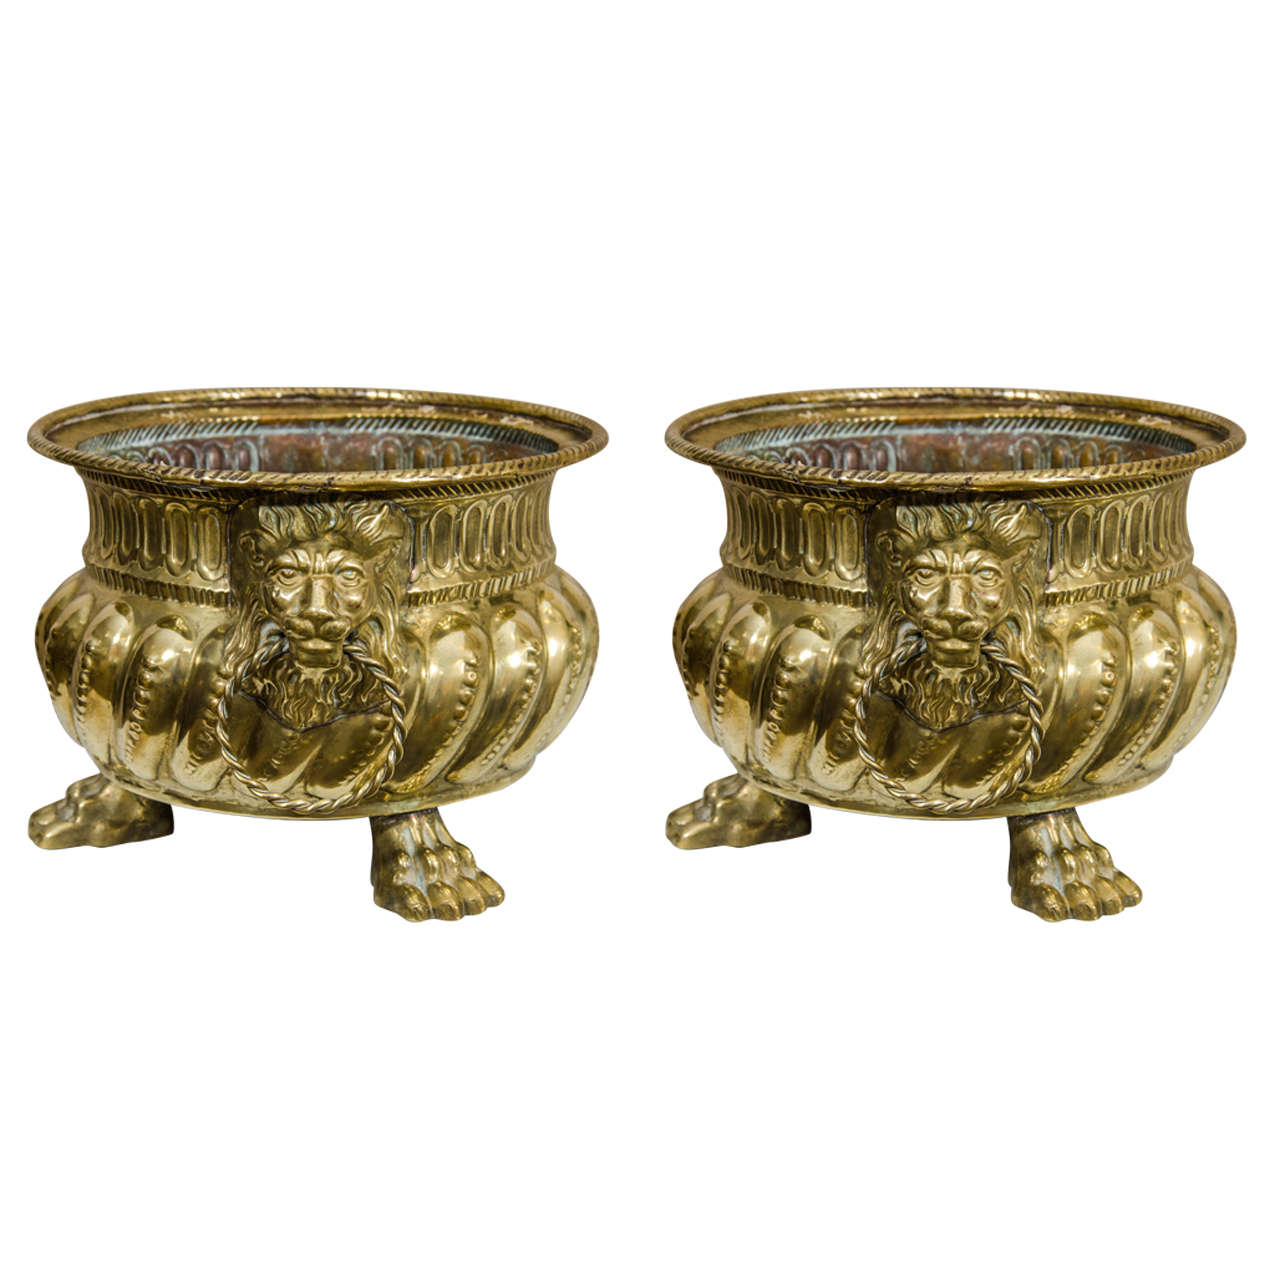 A Pair of Continental Regence Style Brass Repoussé Cachepots For Sale